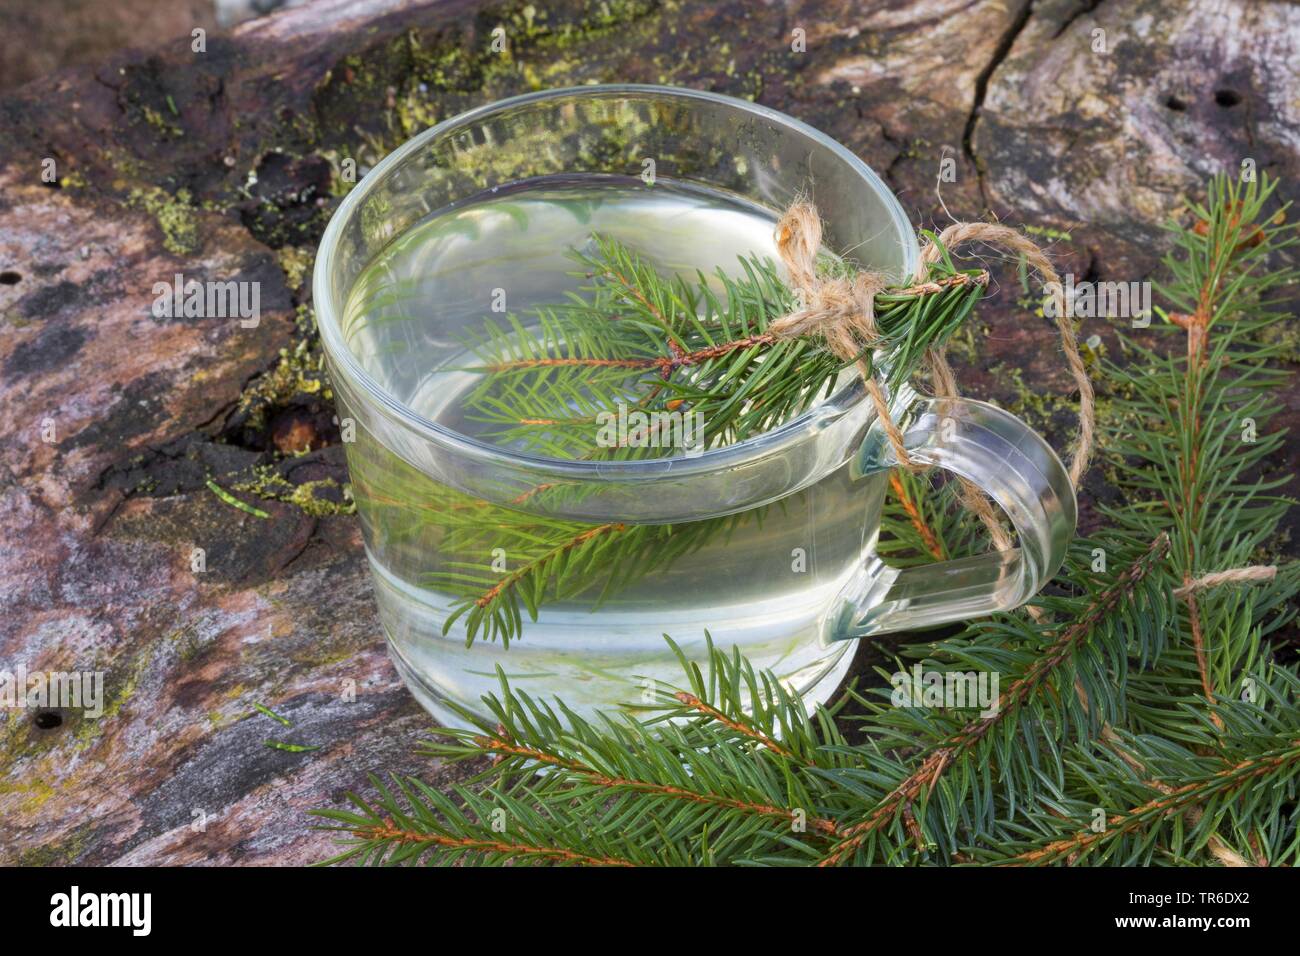 Norway spruce (Picea abies), tree from spruce needle, Germany Stock Photo